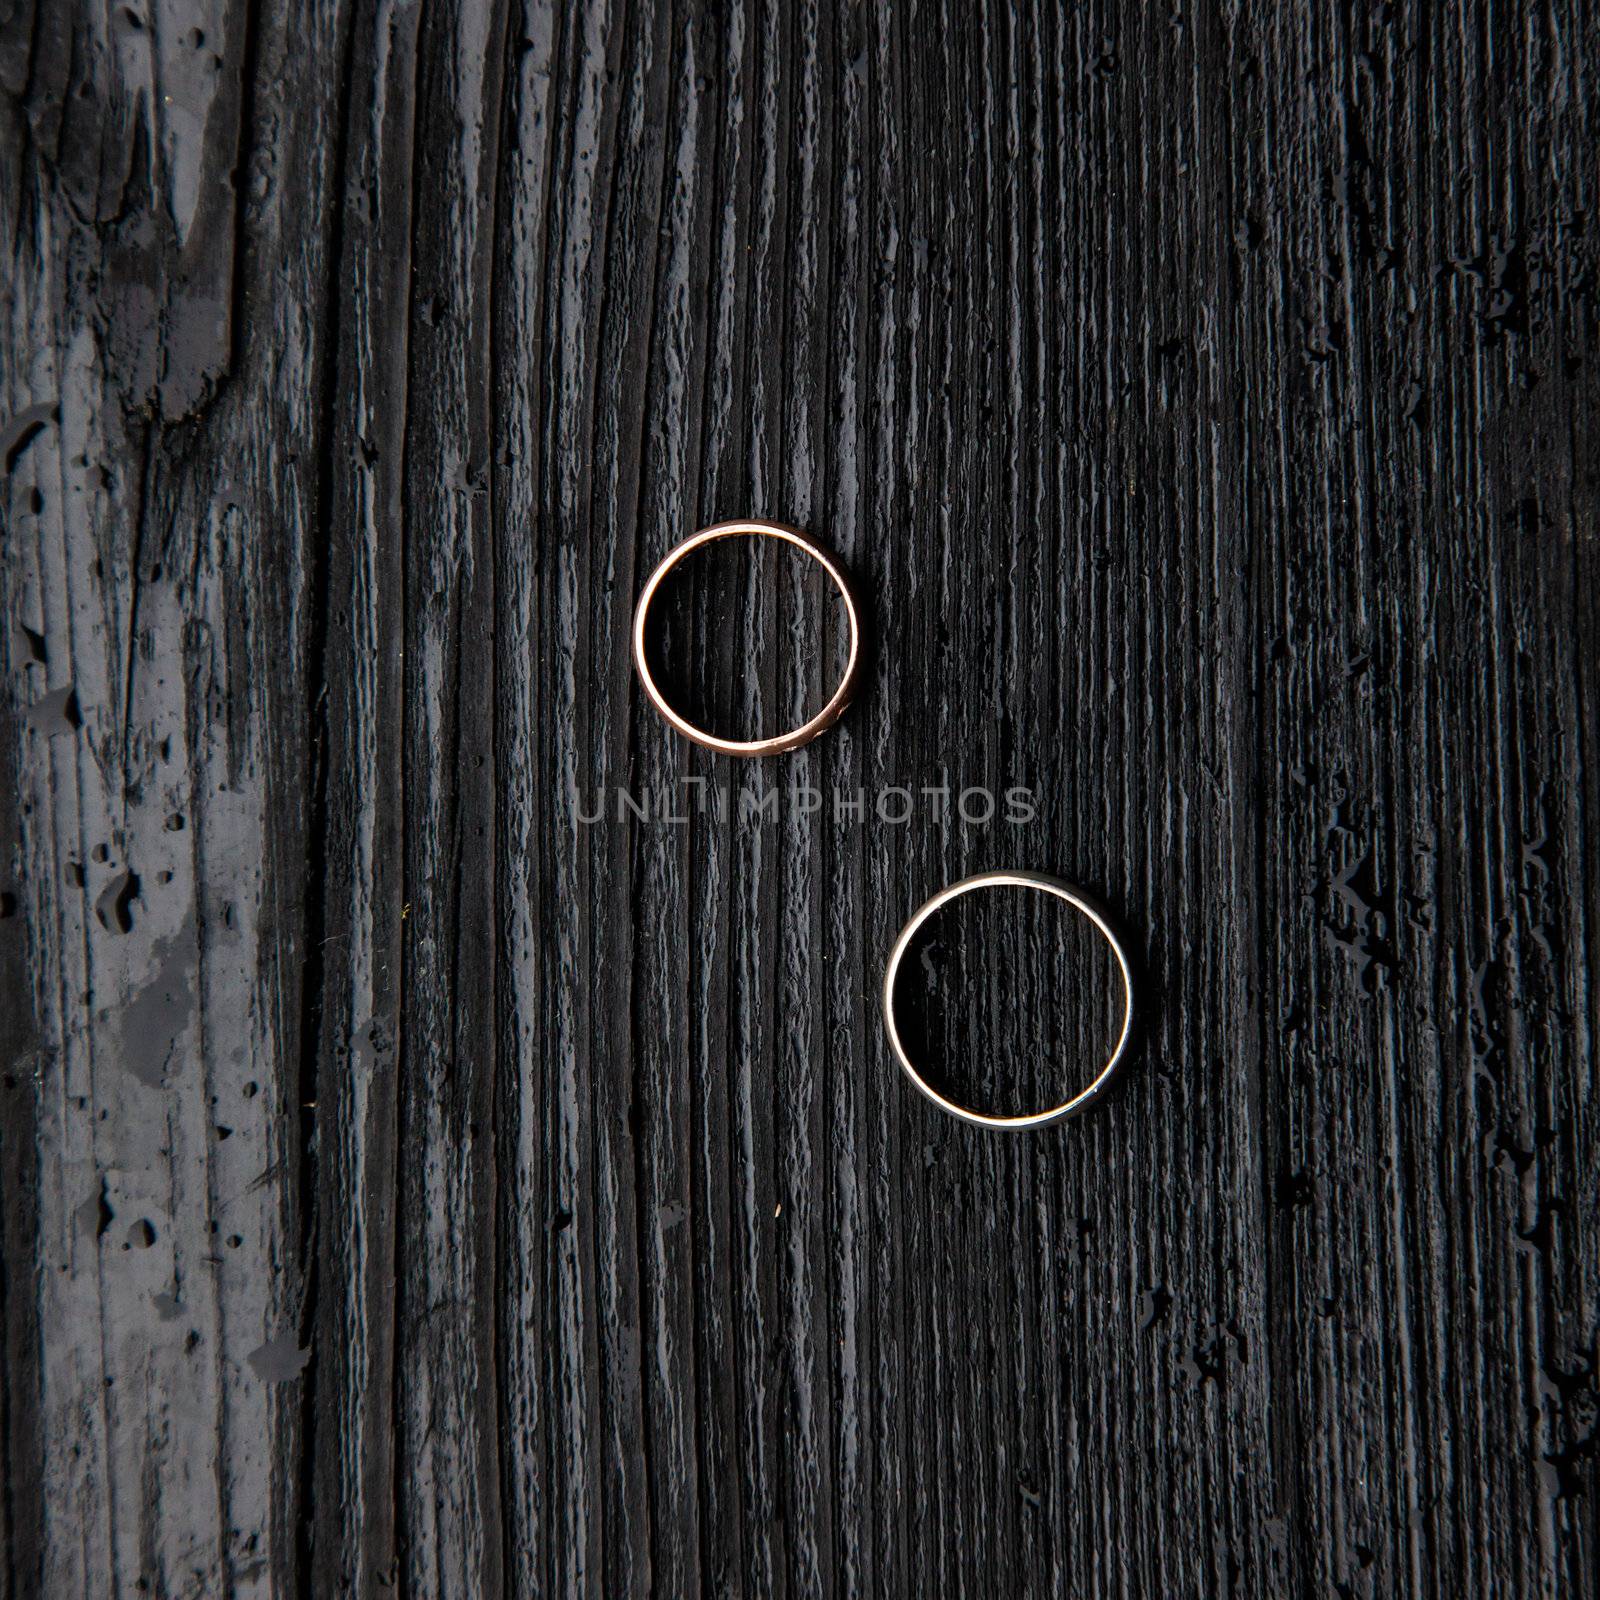 Wedding rings on a dark wooden background.